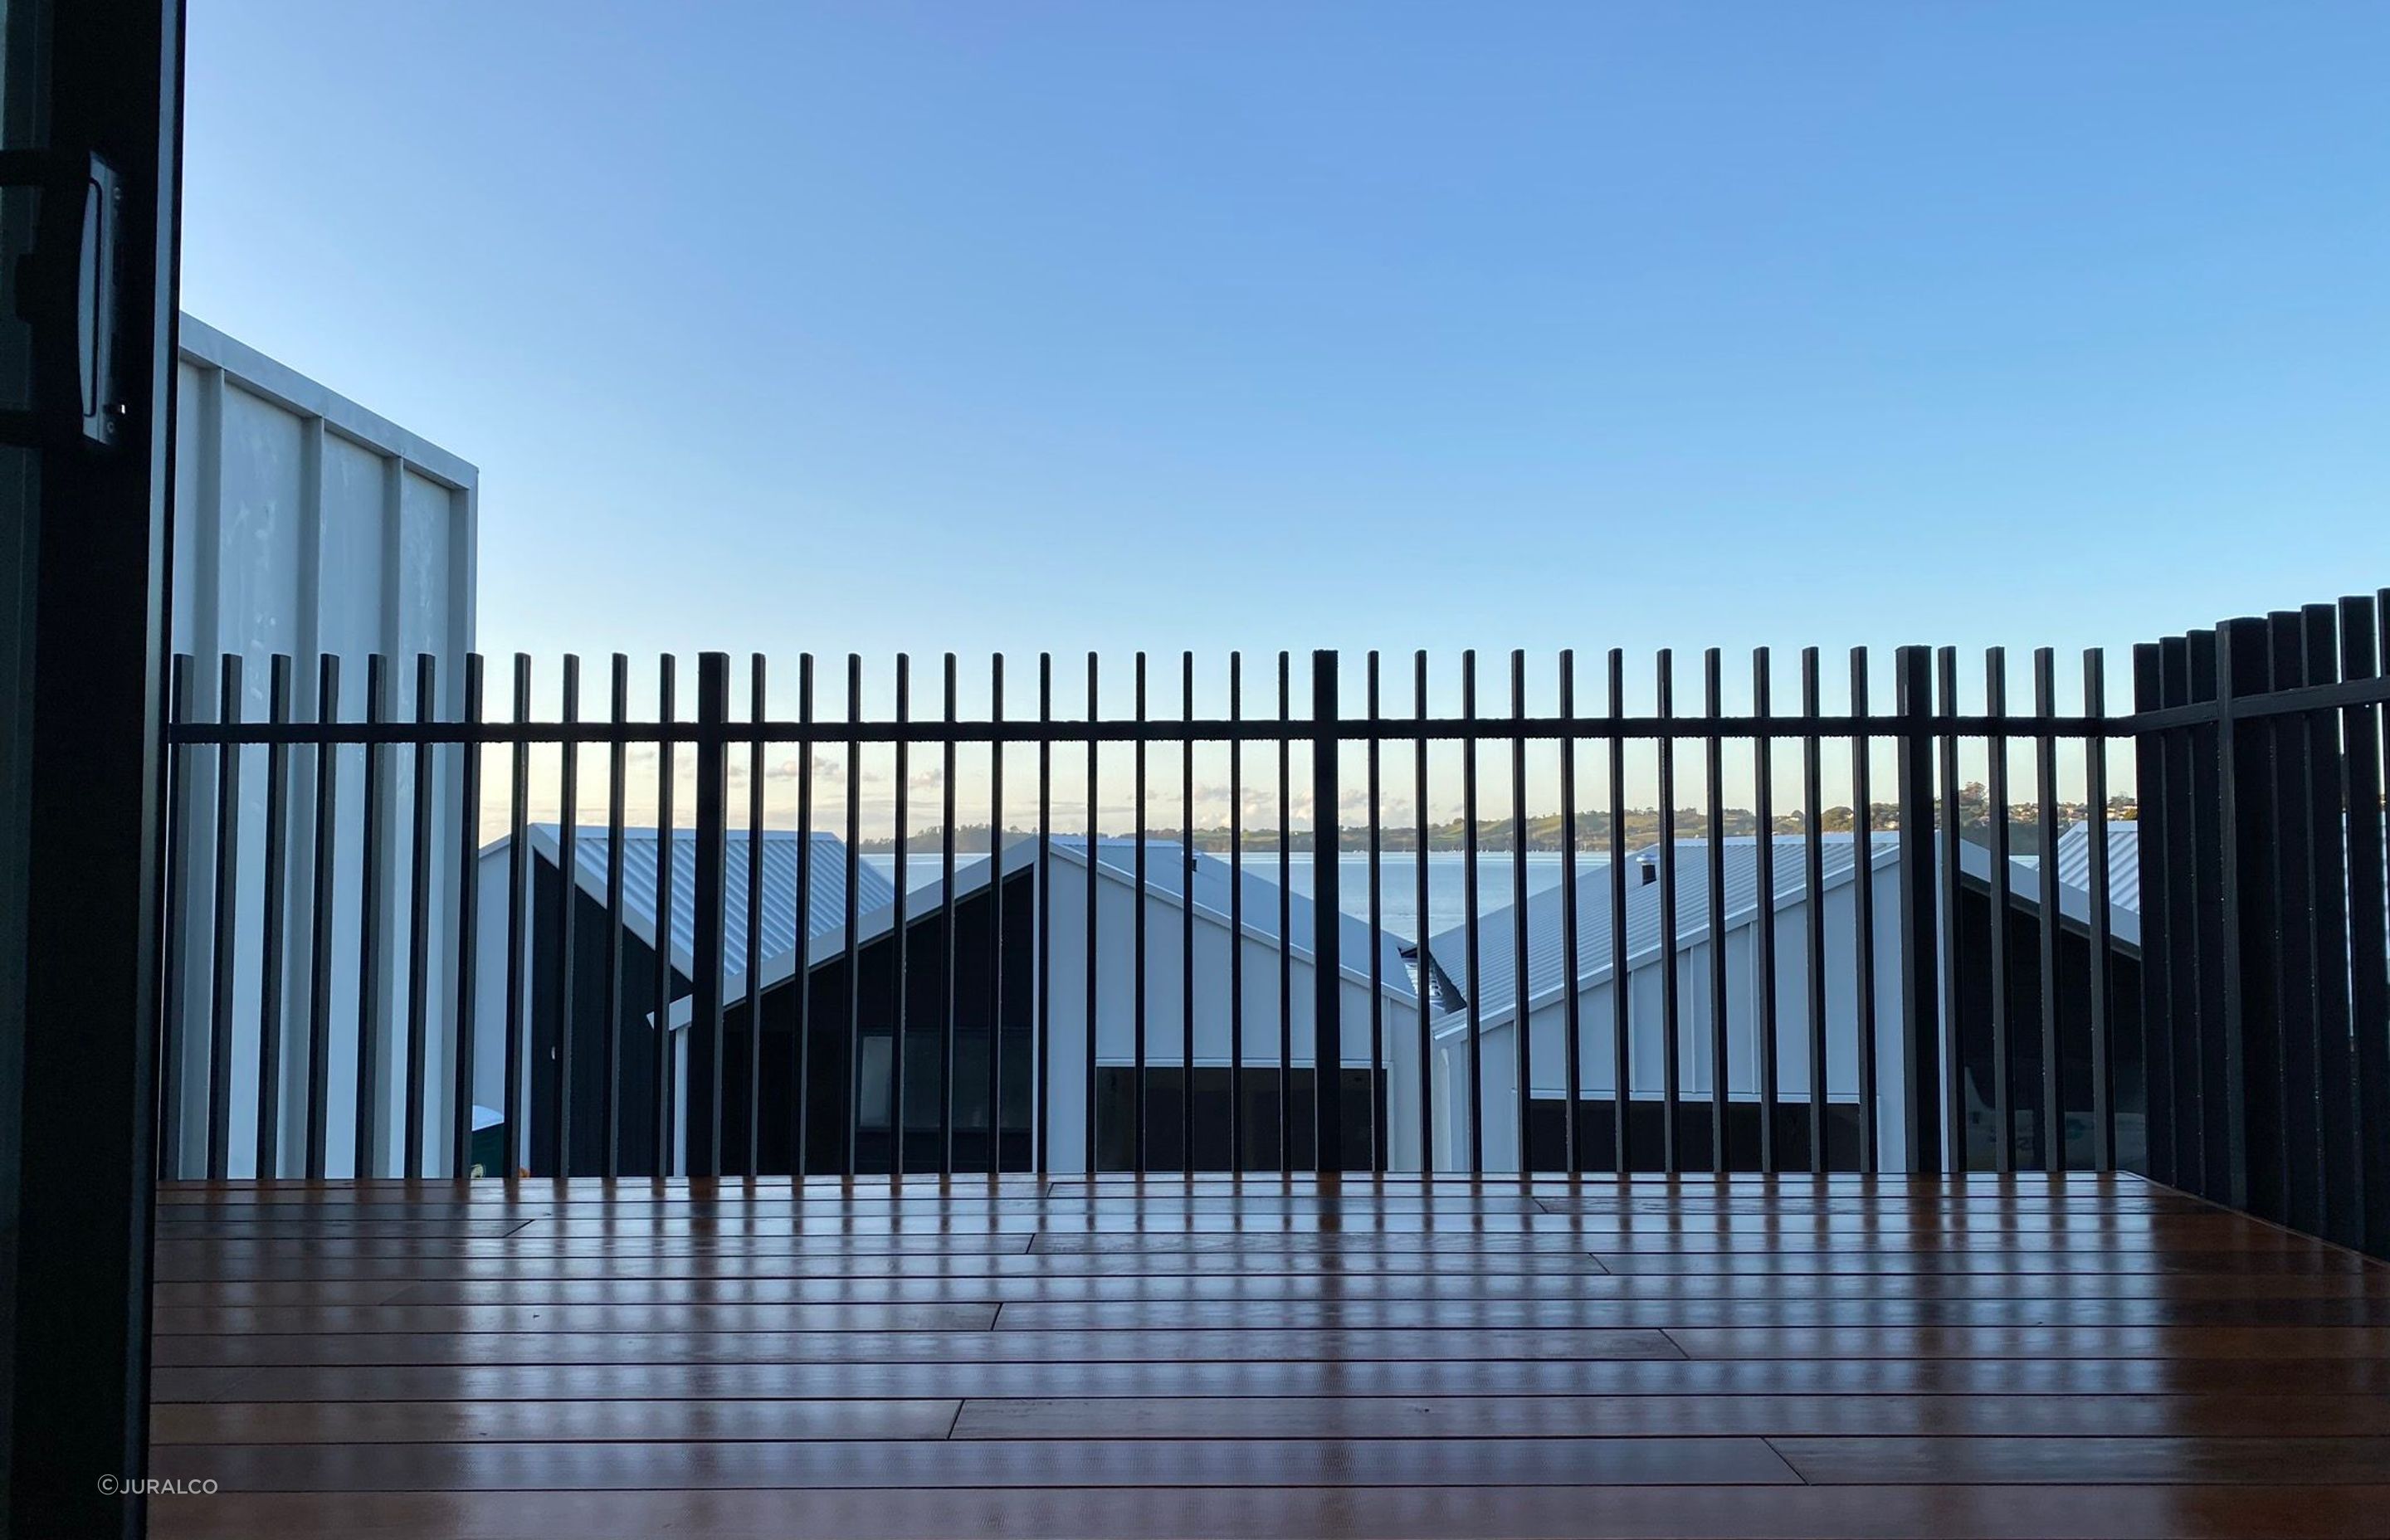 The Stecca Aluminium Balustrade is a prime example of a modern and sleek type of balustrade.